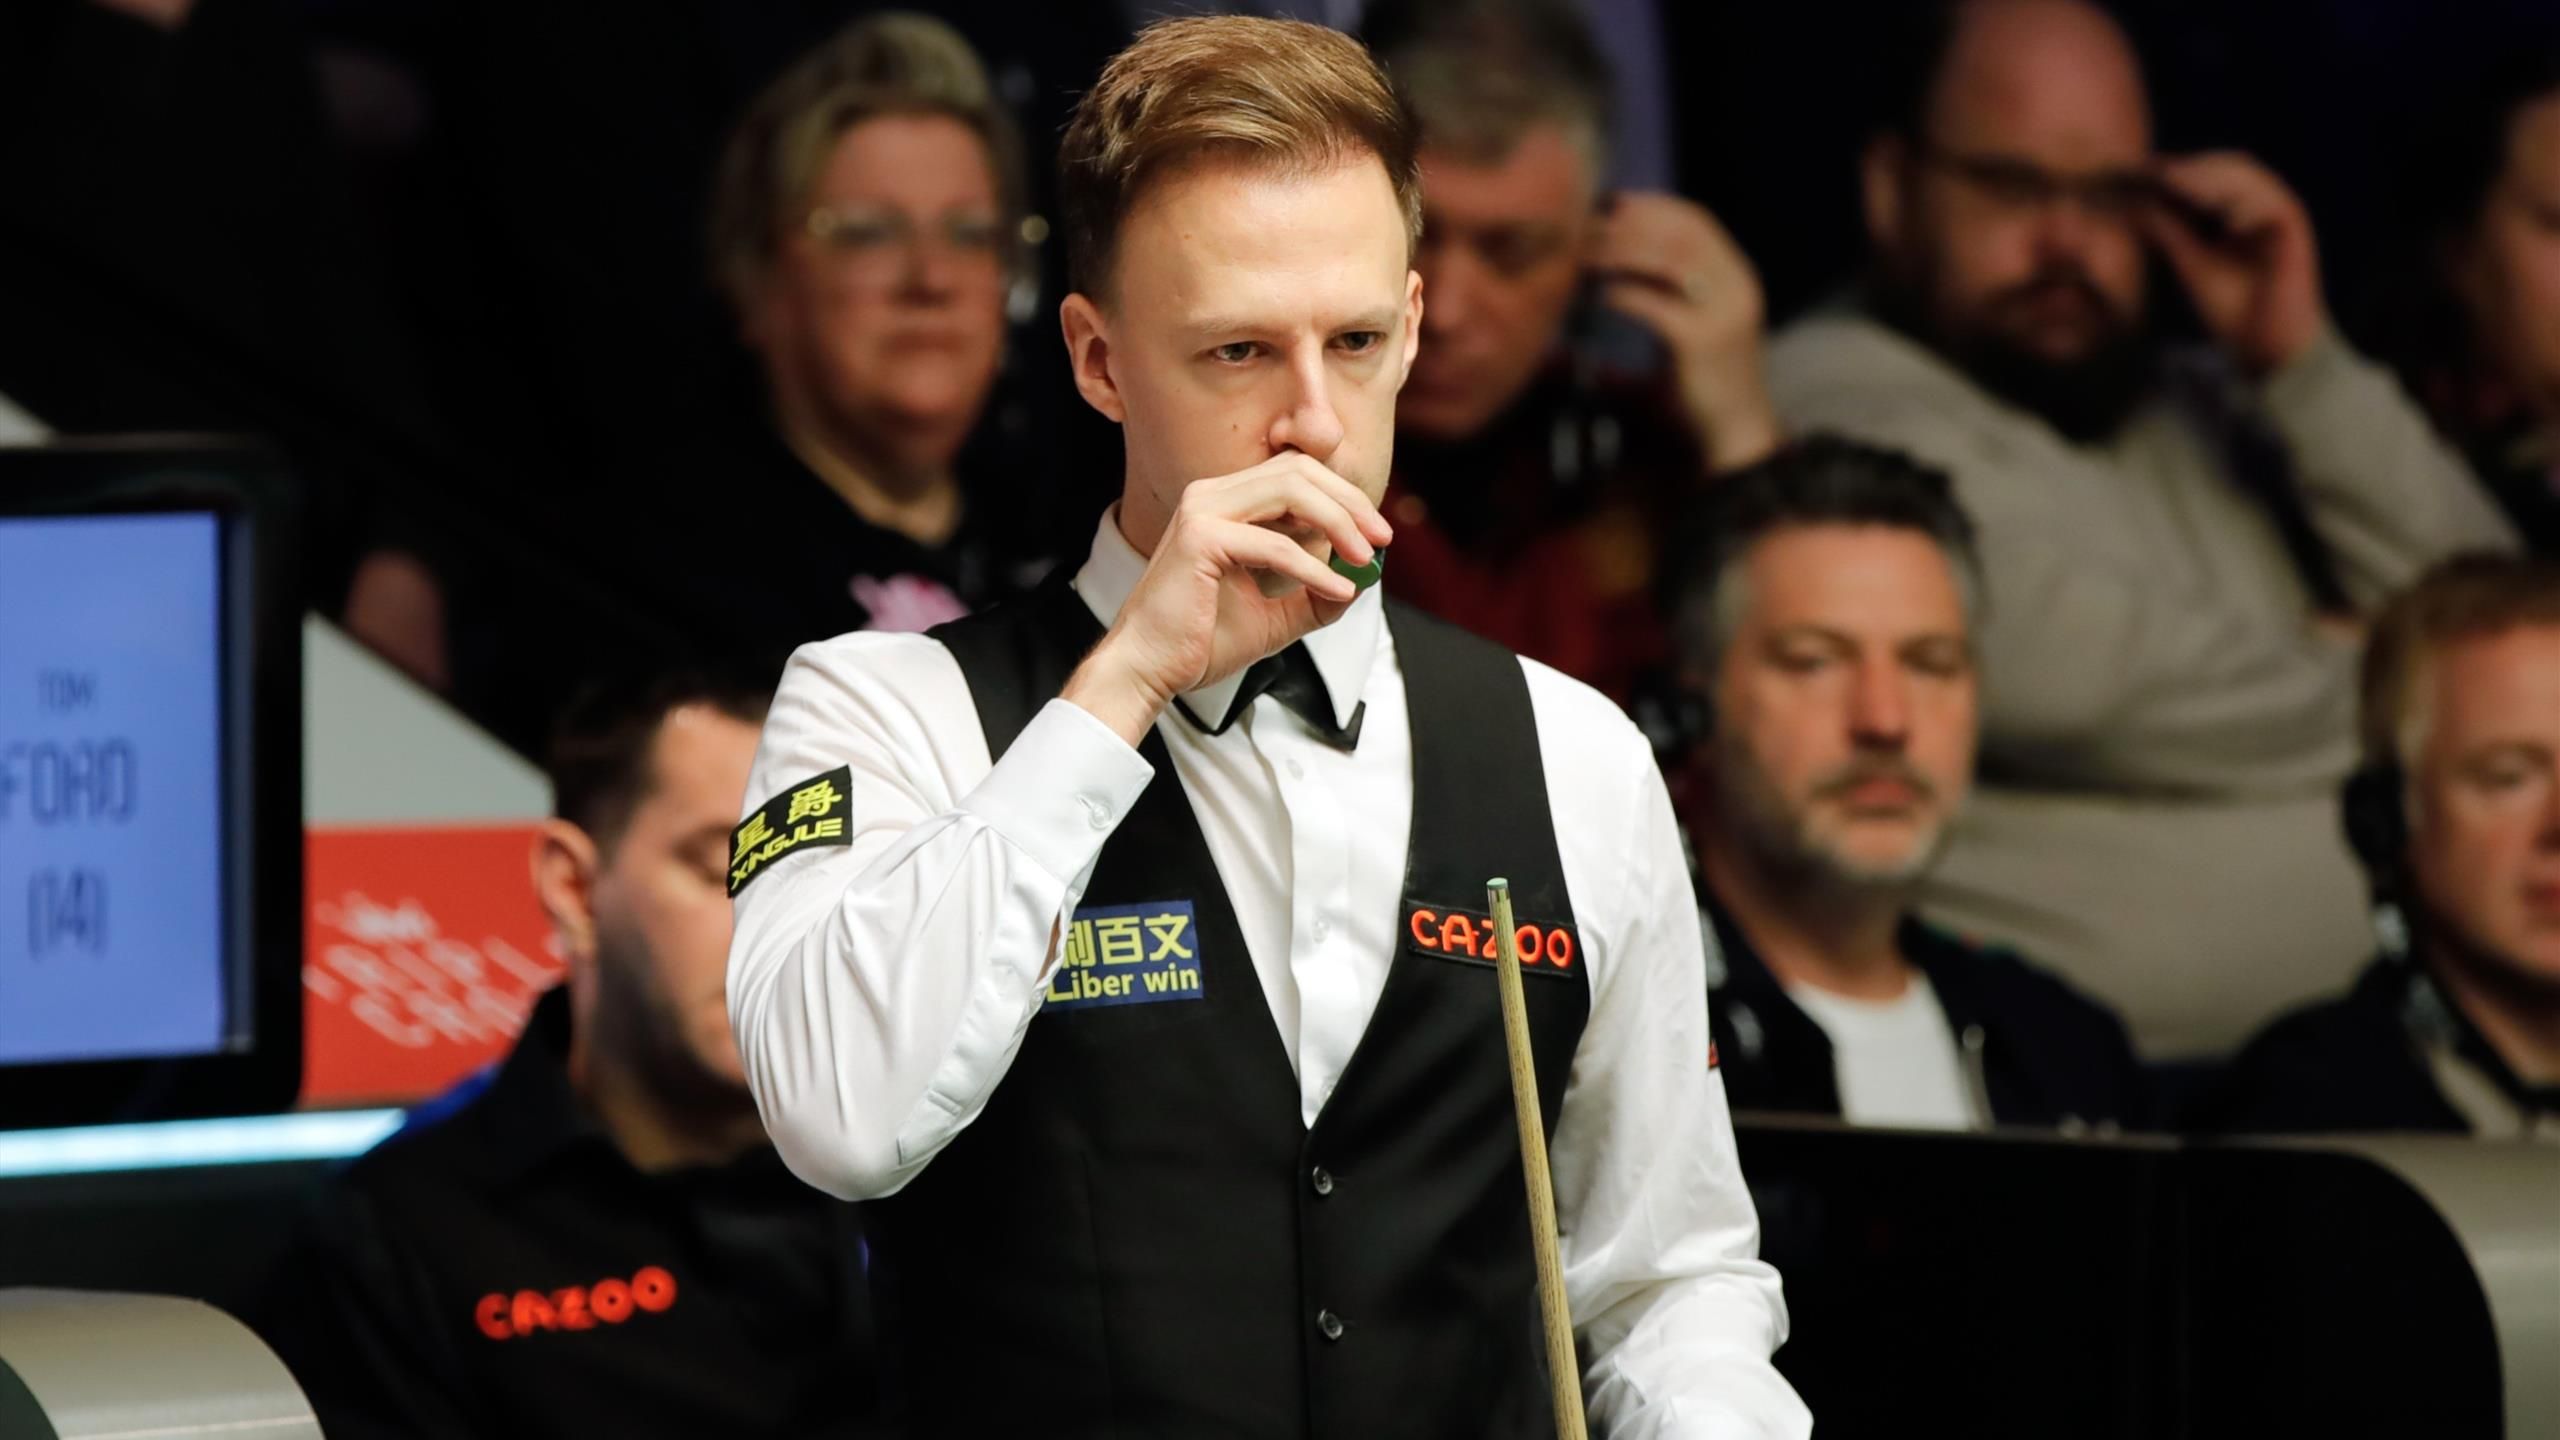 Live Coverage: World Snooker Championship – Judd Trump in the Spotlight before Ronnie O’Sullivan Graces the Crucible Stage